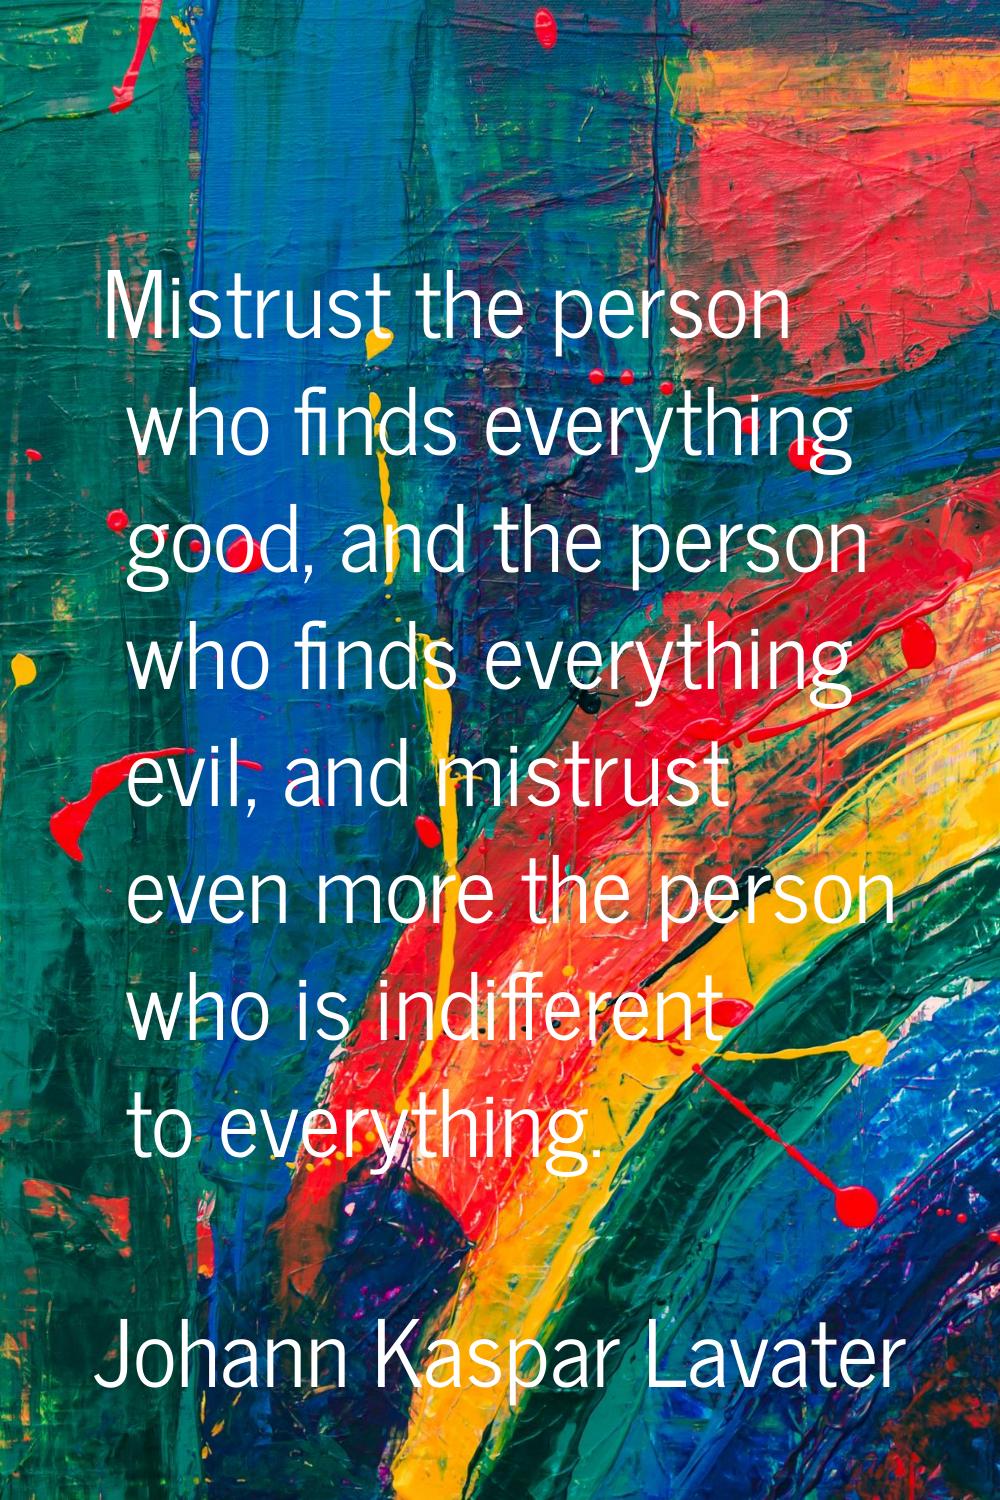 Mistrust the person who finds everything good, and the person who finds everything evil, and mistru